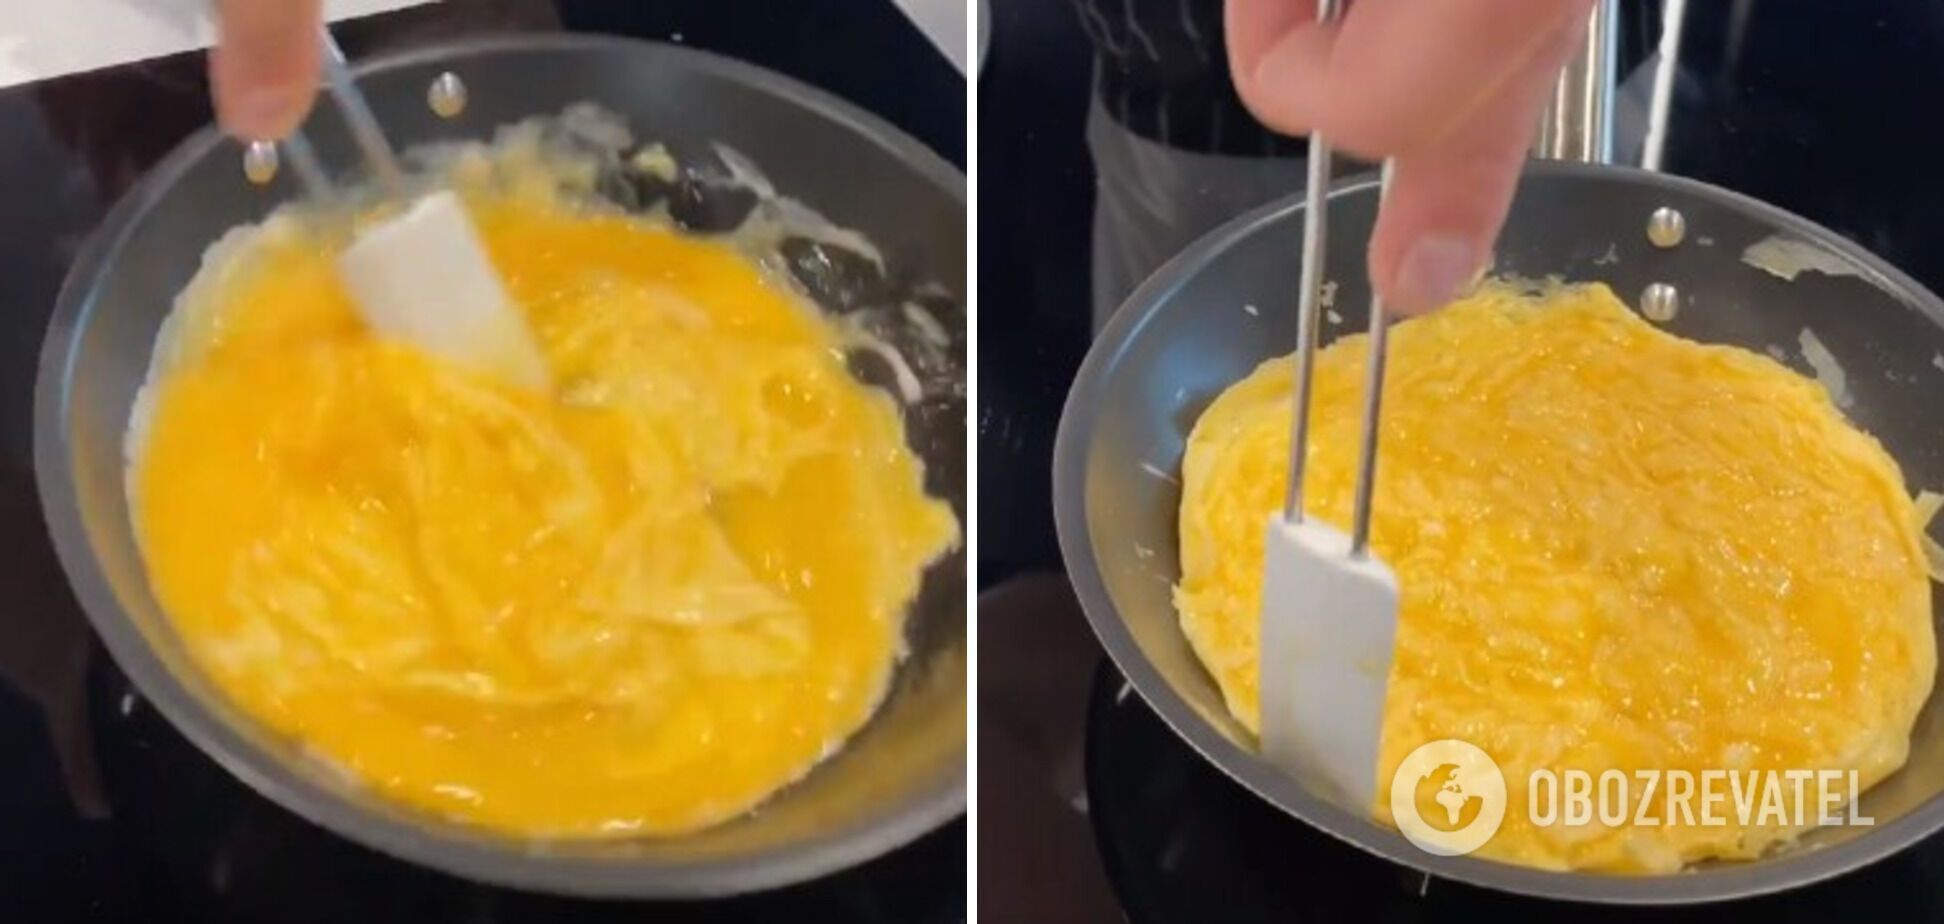 How to cook an omelet correctly